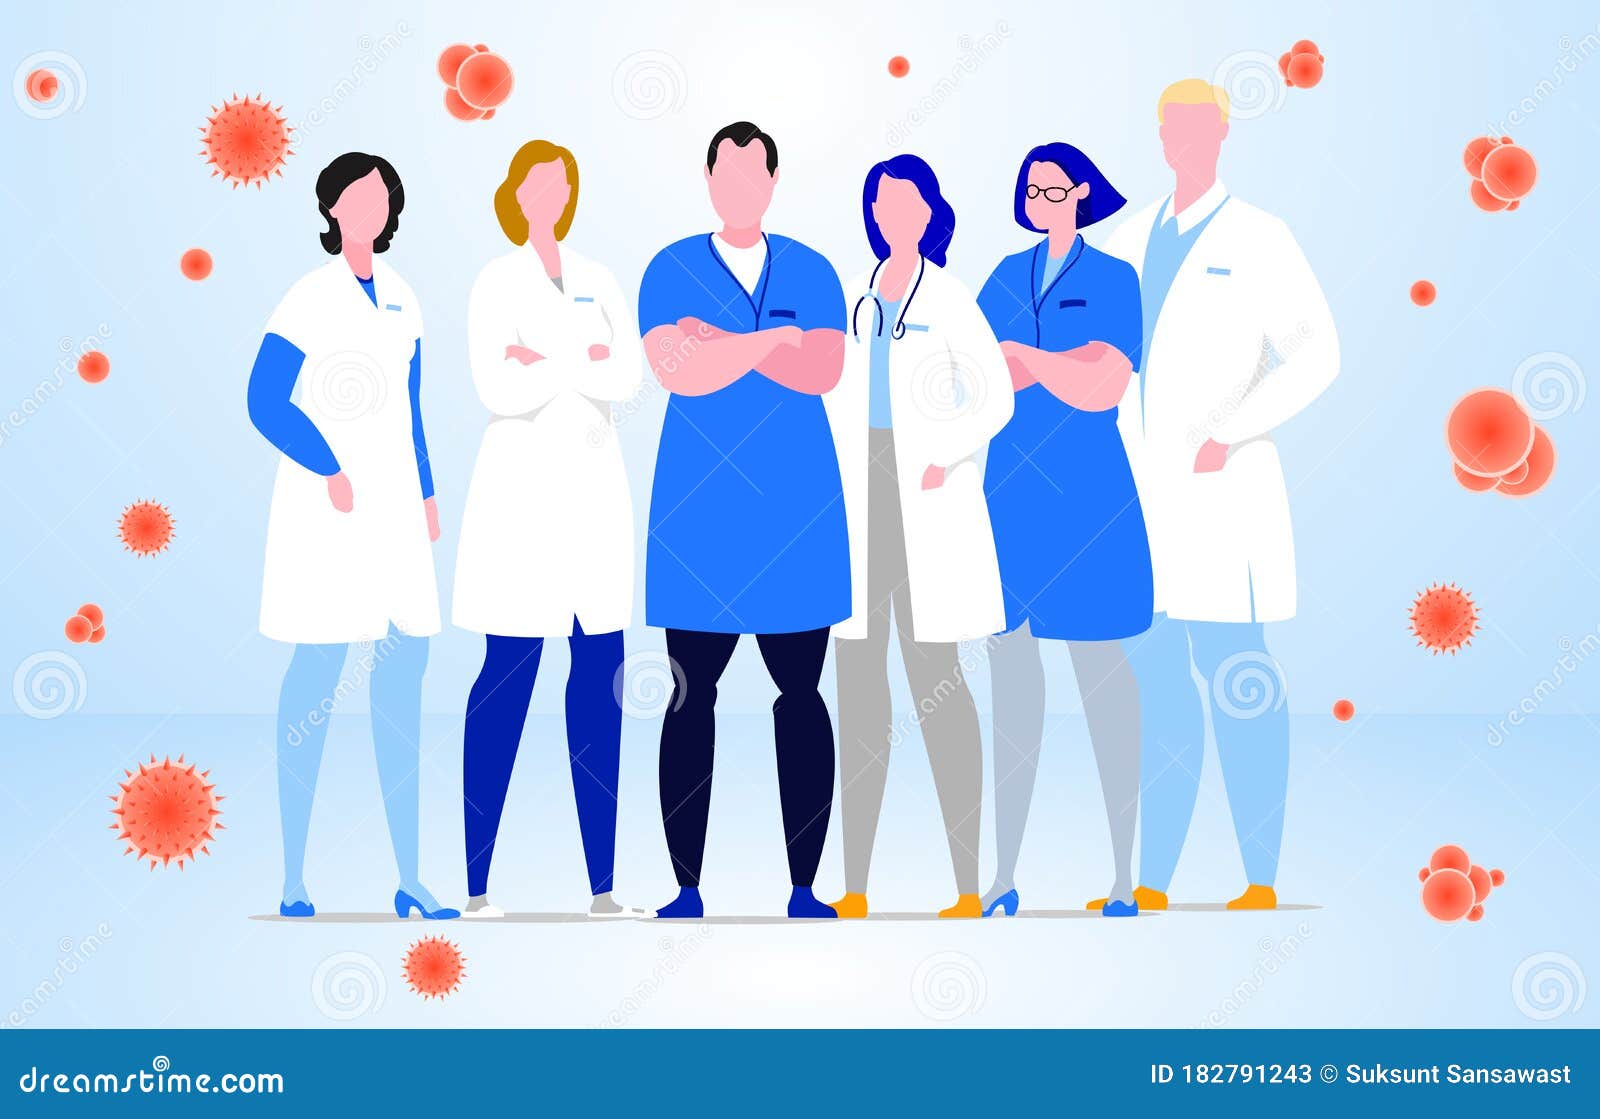 Group of Hospital Medical Staff Standing Together. Stock Vector ...